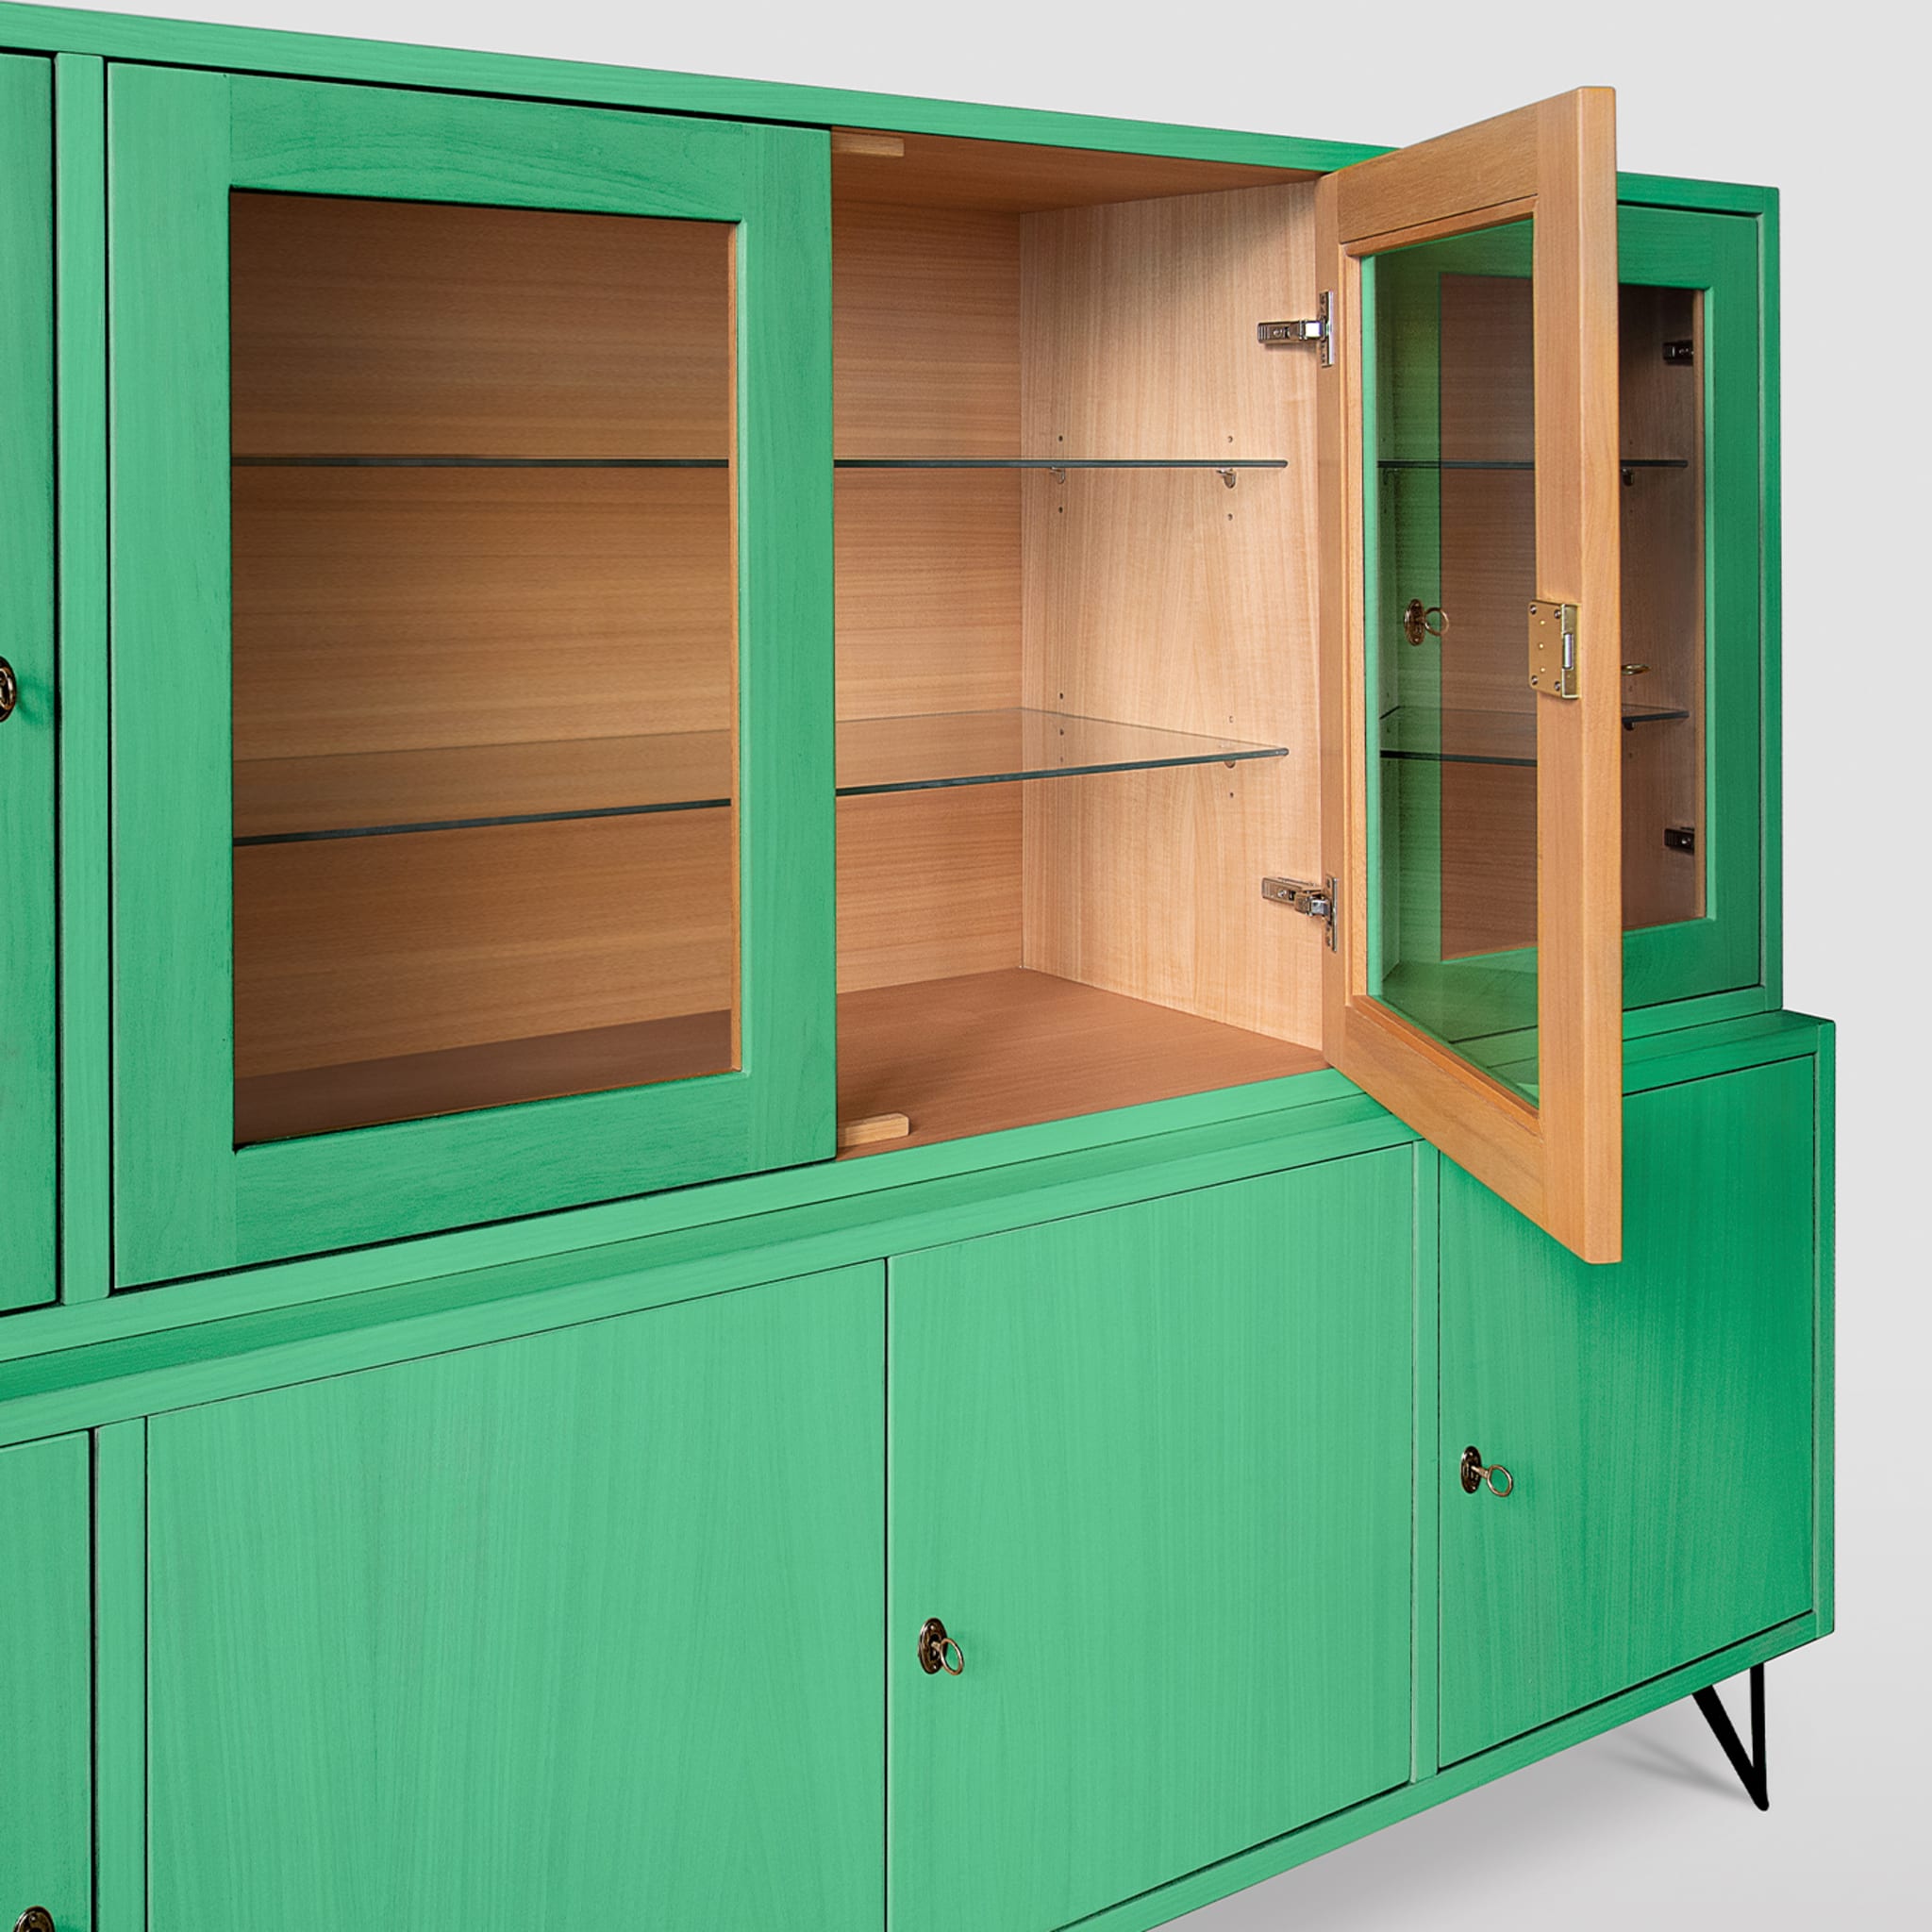 Eroica Mint Green Cabinet by Eugenio Gambella - Alternative view 3